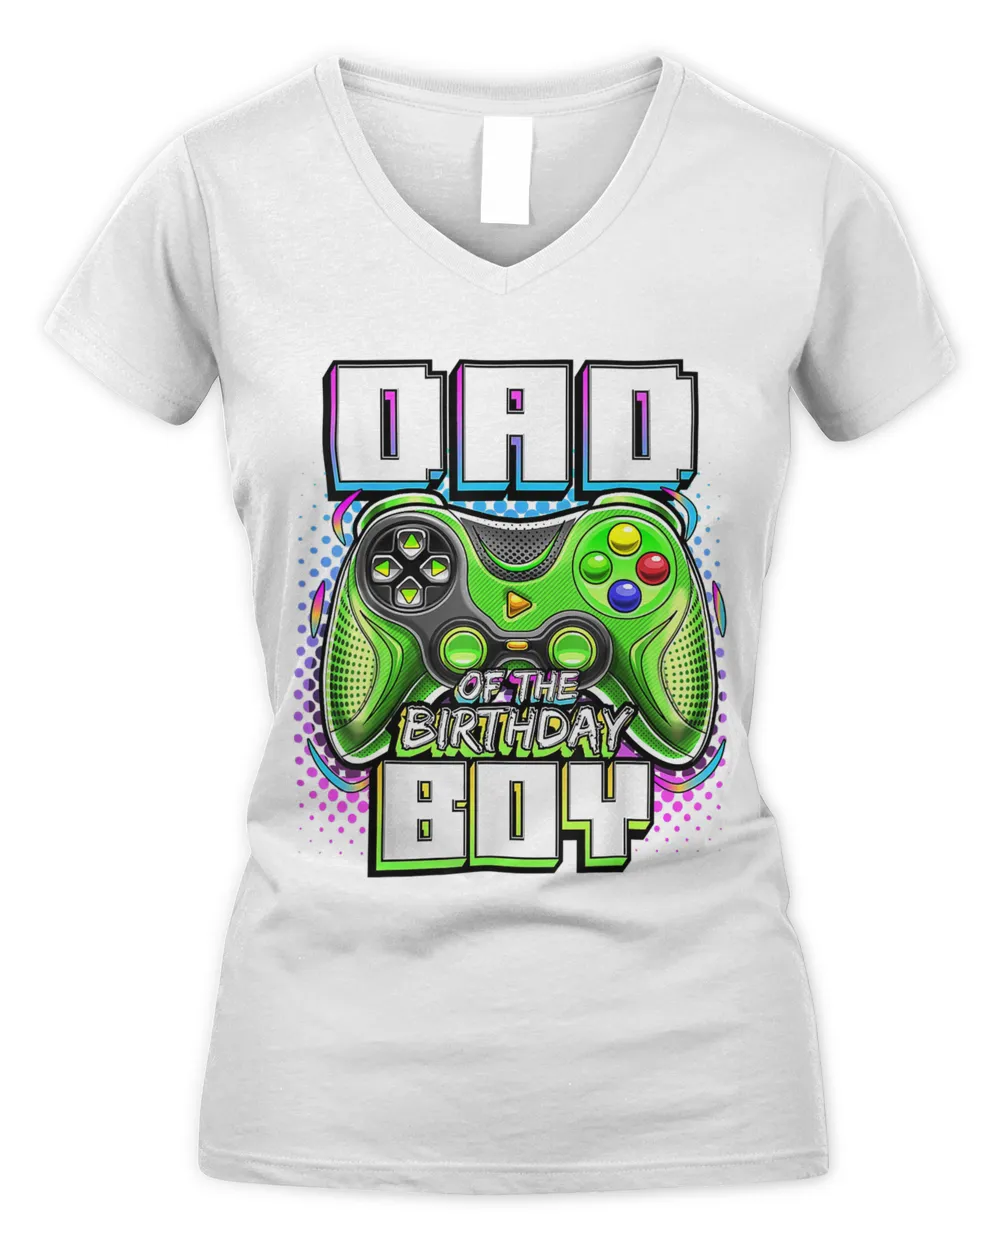 Dad of the Birthday Boy Gamers Video Games Fathers Day Party T-Shirt